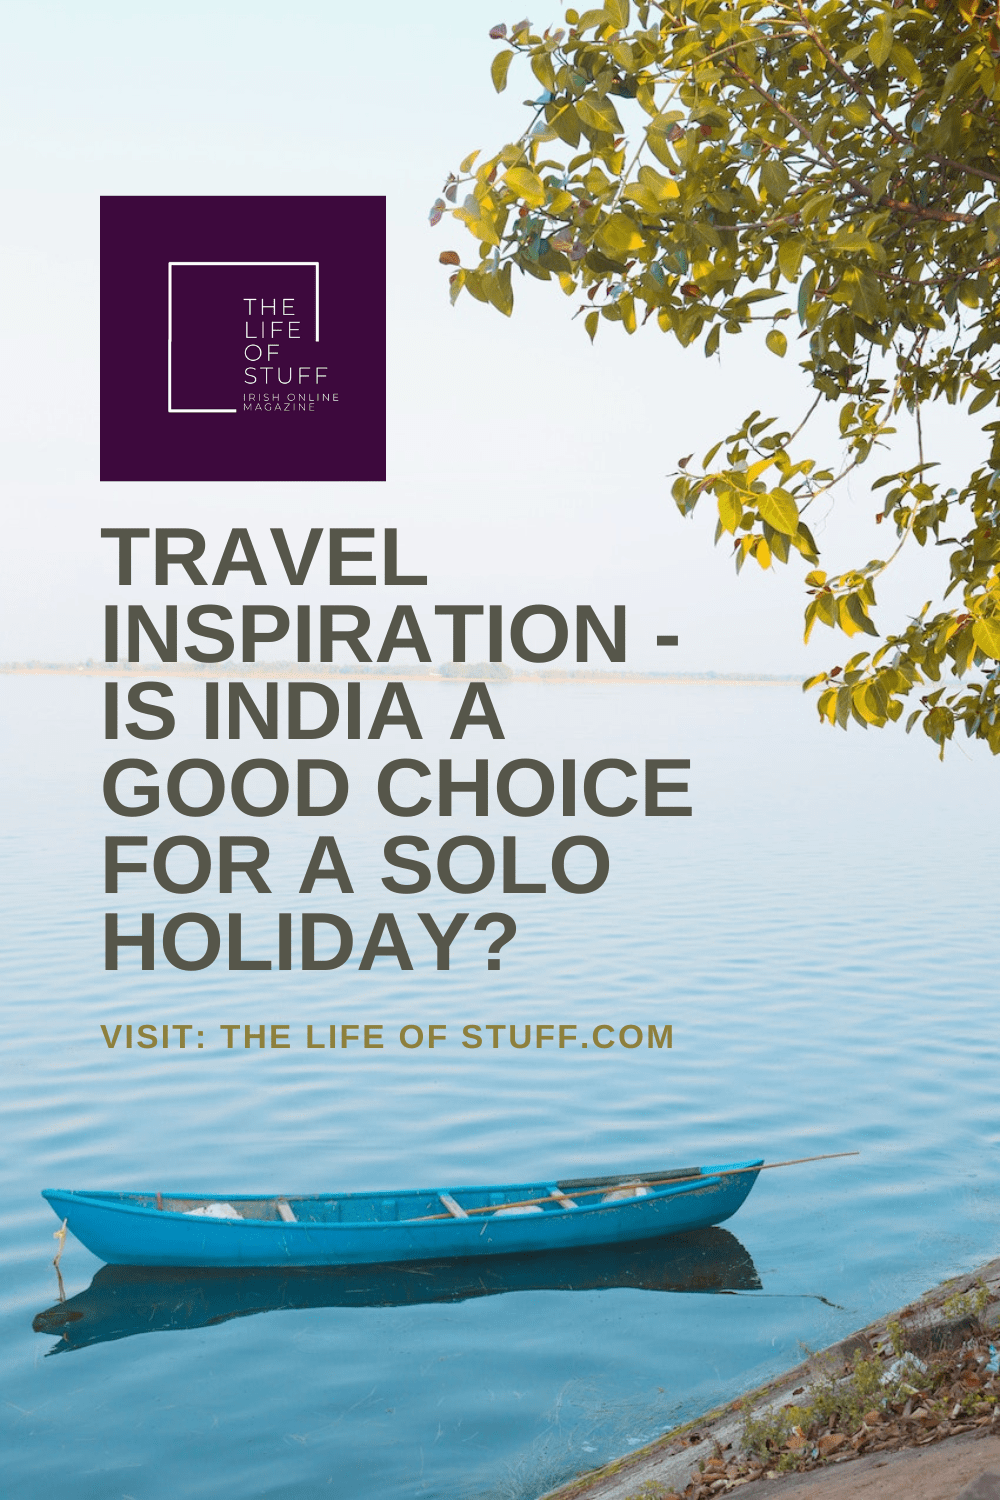 Travel Inspiration - Is India a Good Choice for a Solo Holiday - The Life of Stuff